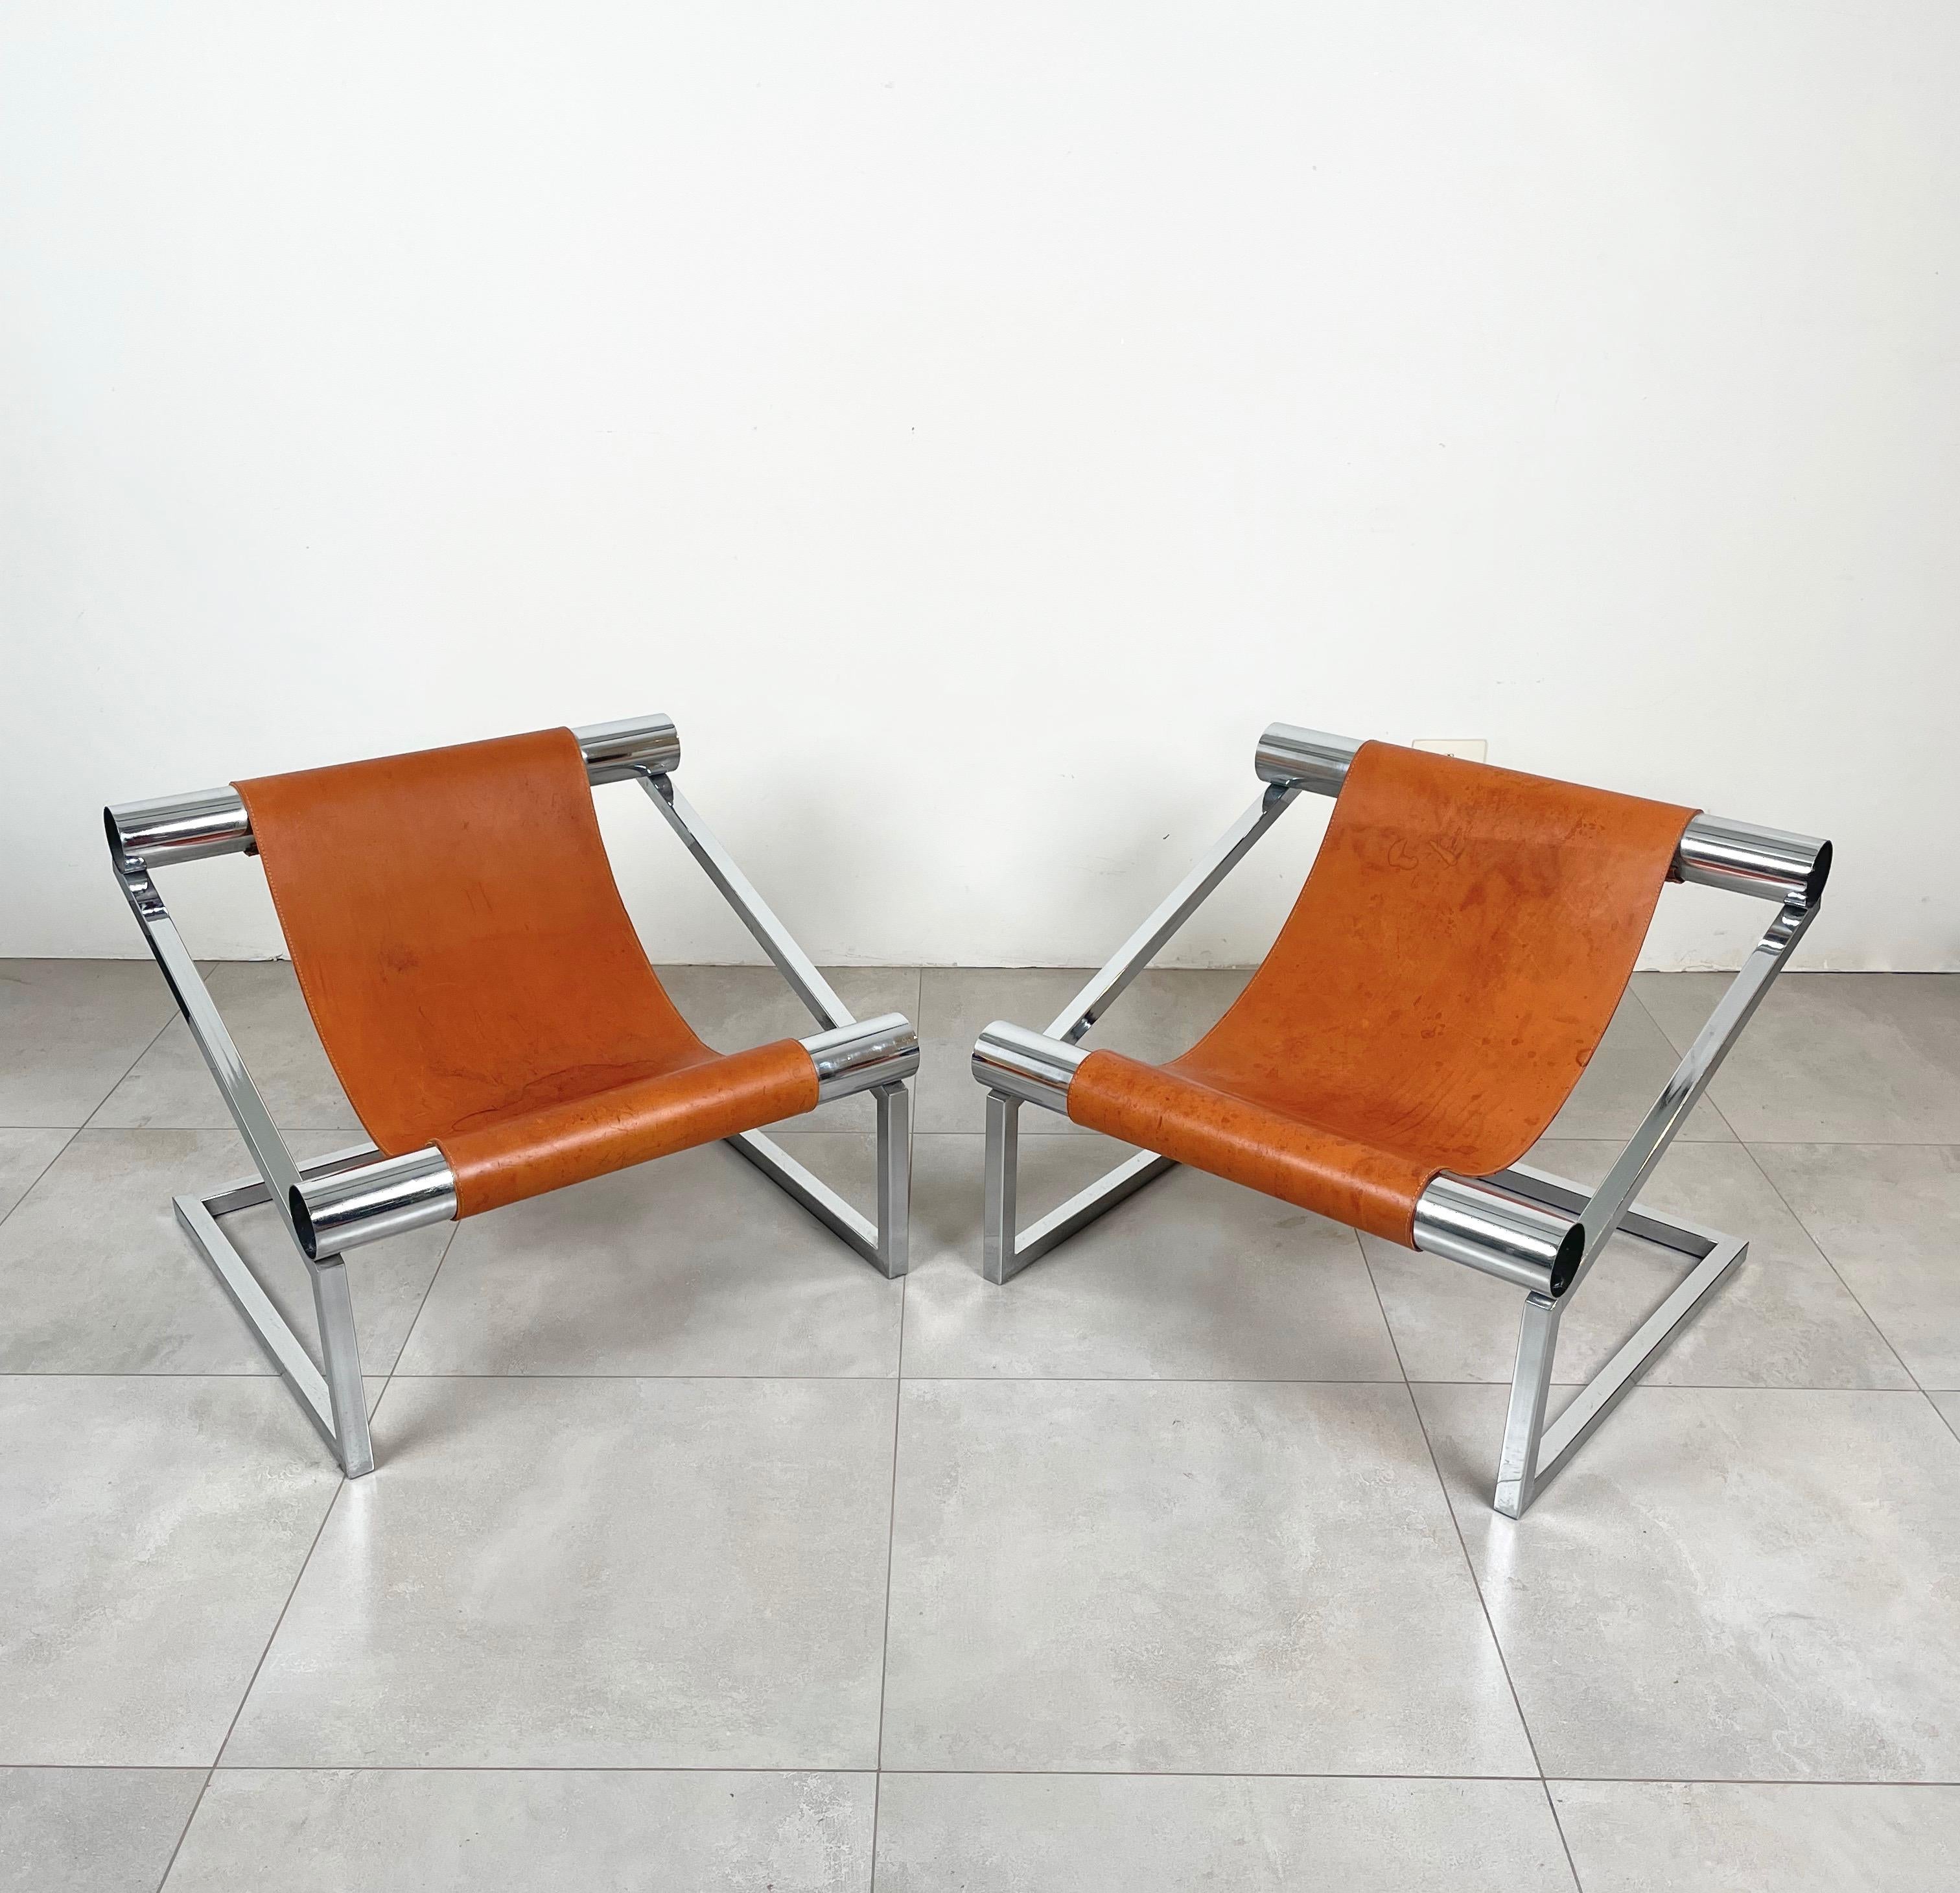 Beautiful Mid-Century Modern pair of armchairs in a chrome structure and brown leather seating. 

Made in Italy in the 1970s.